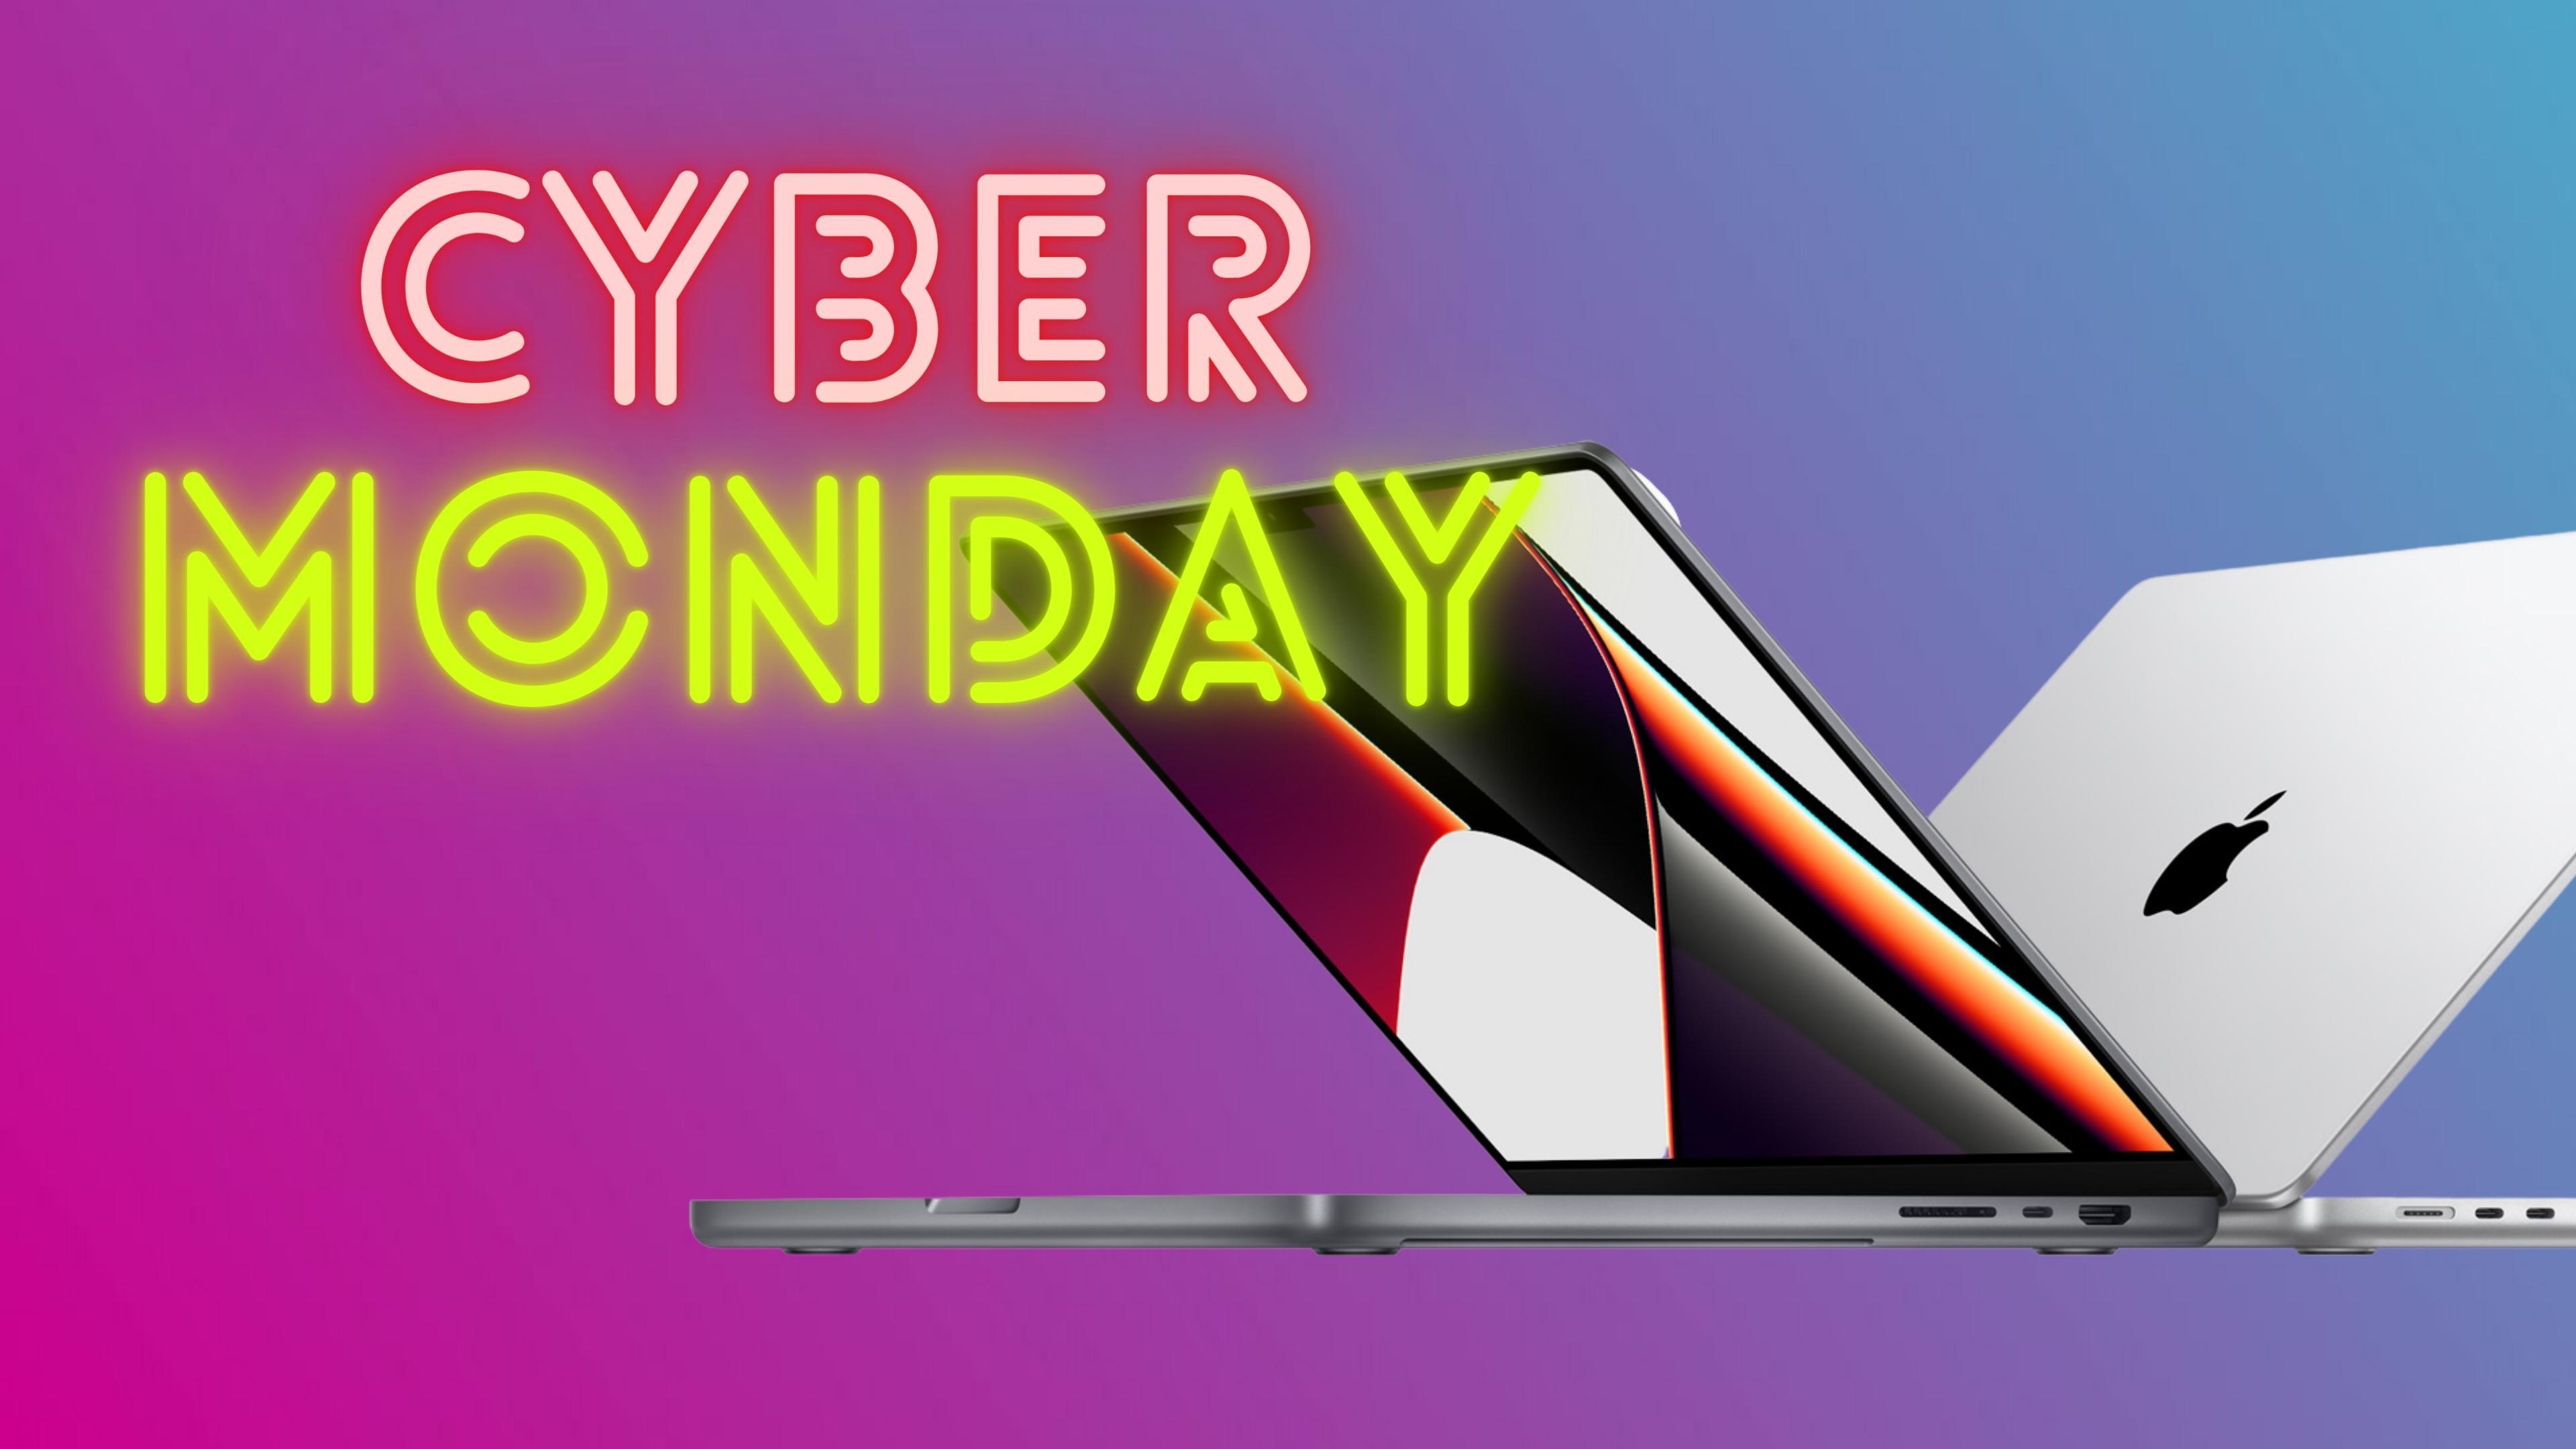 The Macbook Air is $200 Off During Apple's Cyber Monday Sale